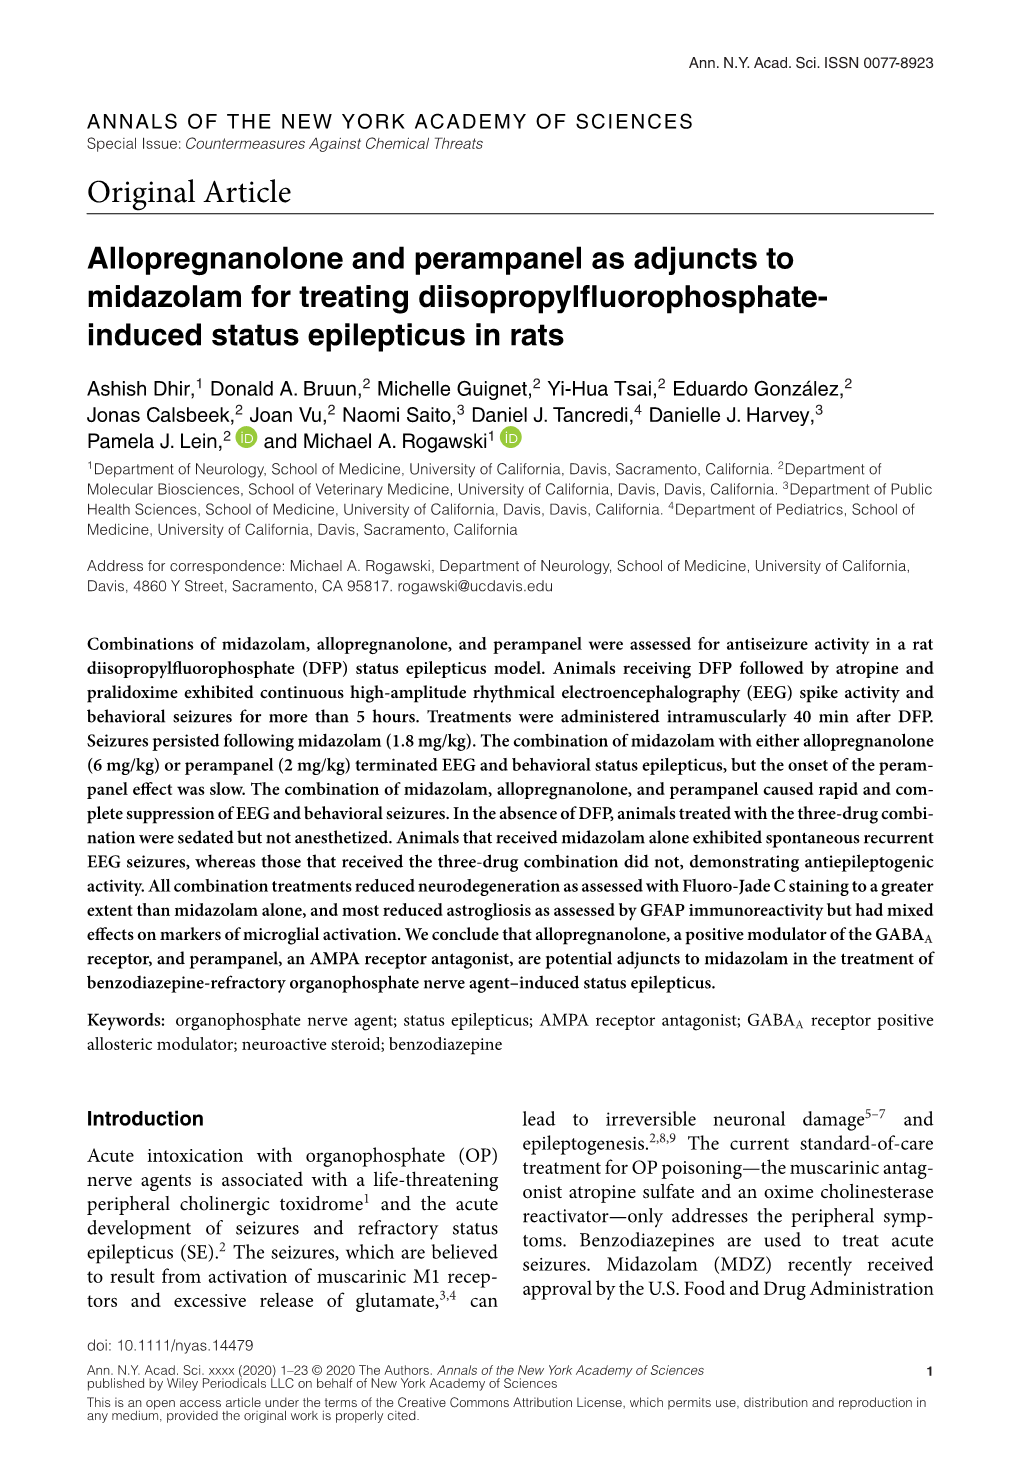 Allopregnanolone and Perampanel As Adjuncts to Midazolam for Treating Diisopropylﬂuorophosphate- Induced Status Epilepticus in Rats